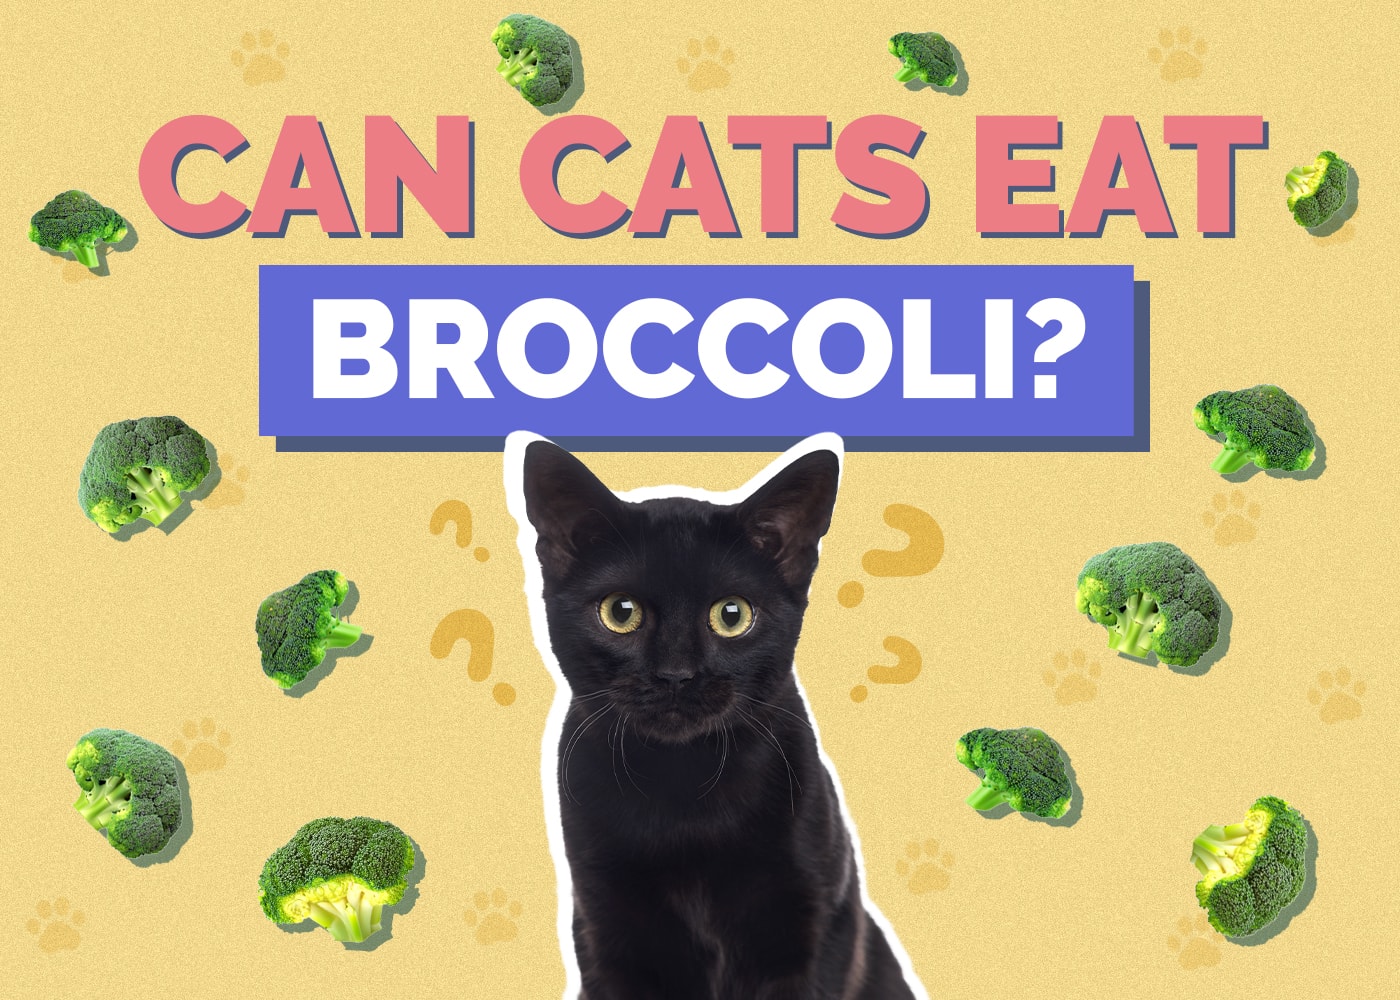 Can Cats Eat broccoli